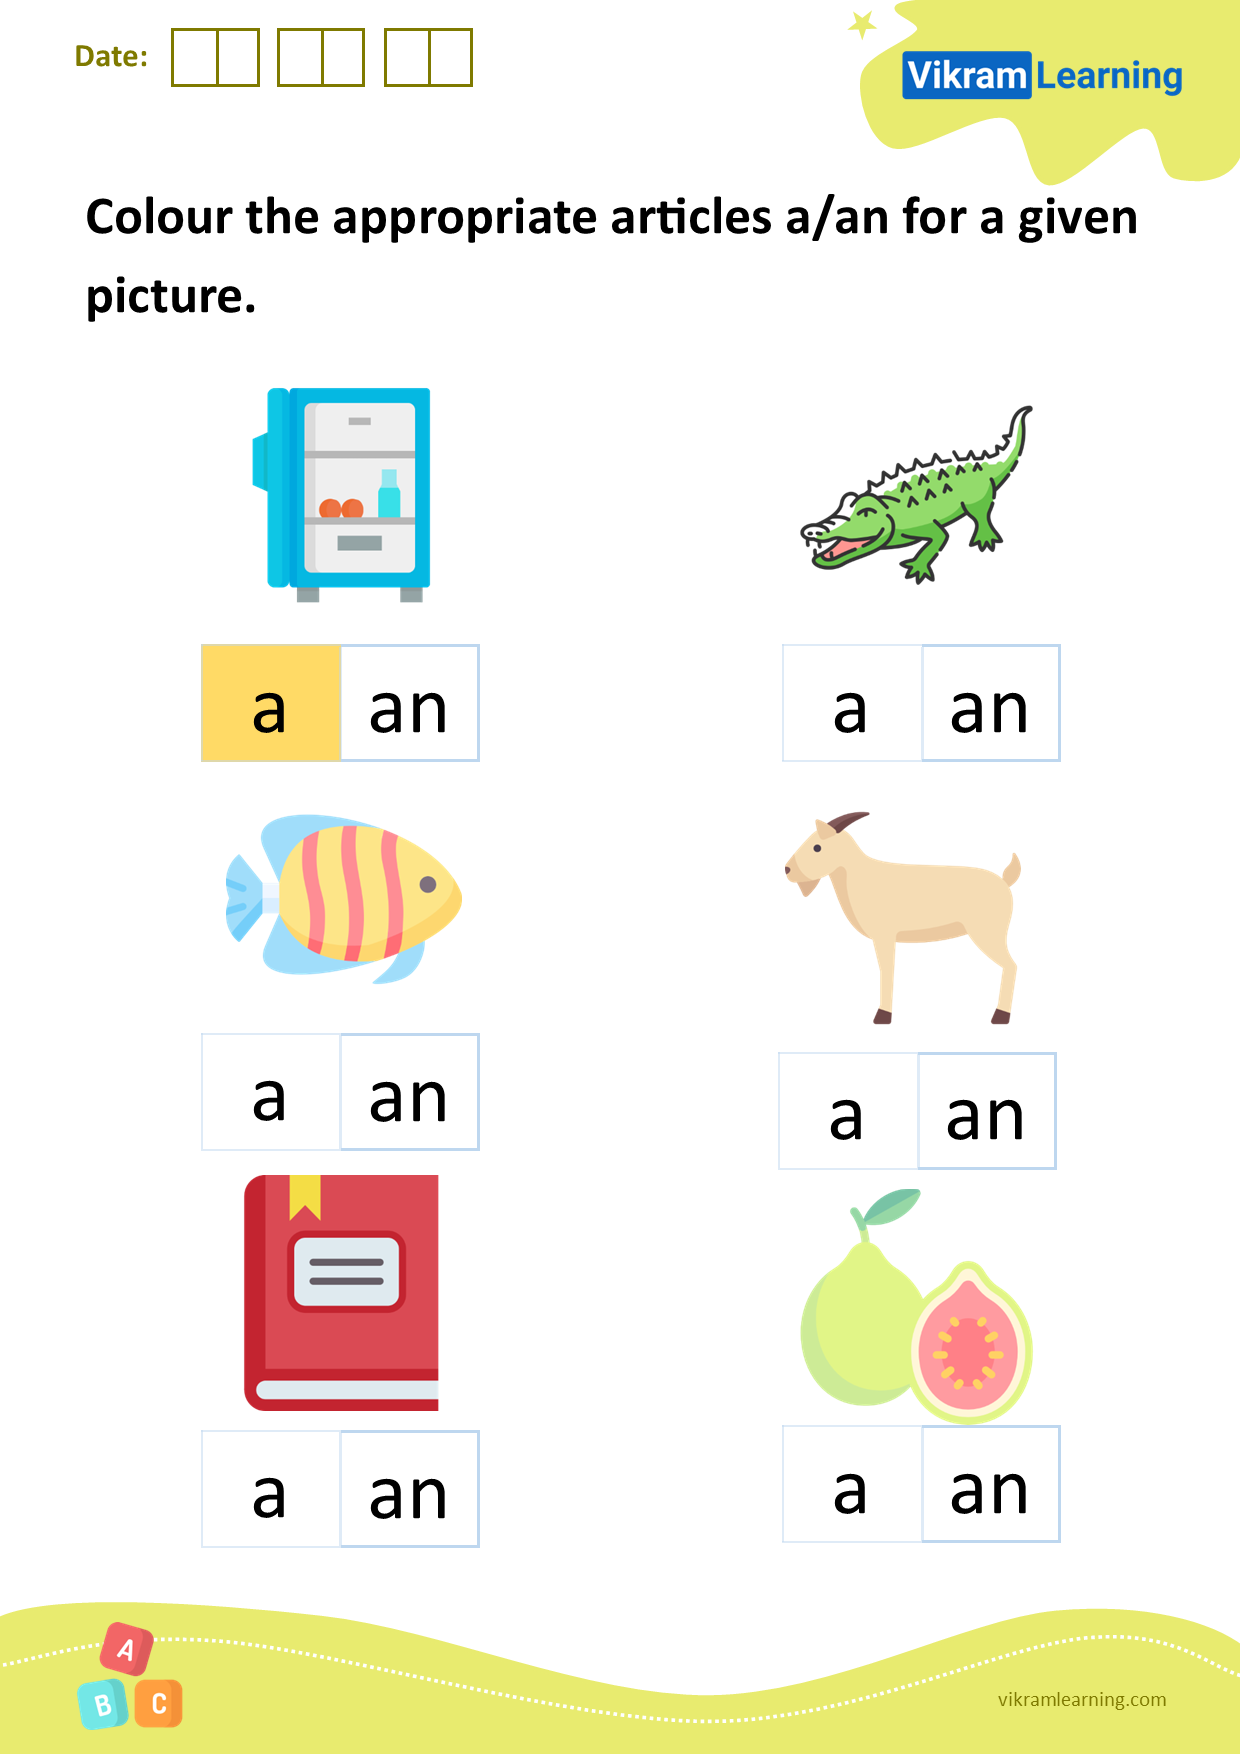 Download colour the appropriate articles a/an for a given picture worksheets